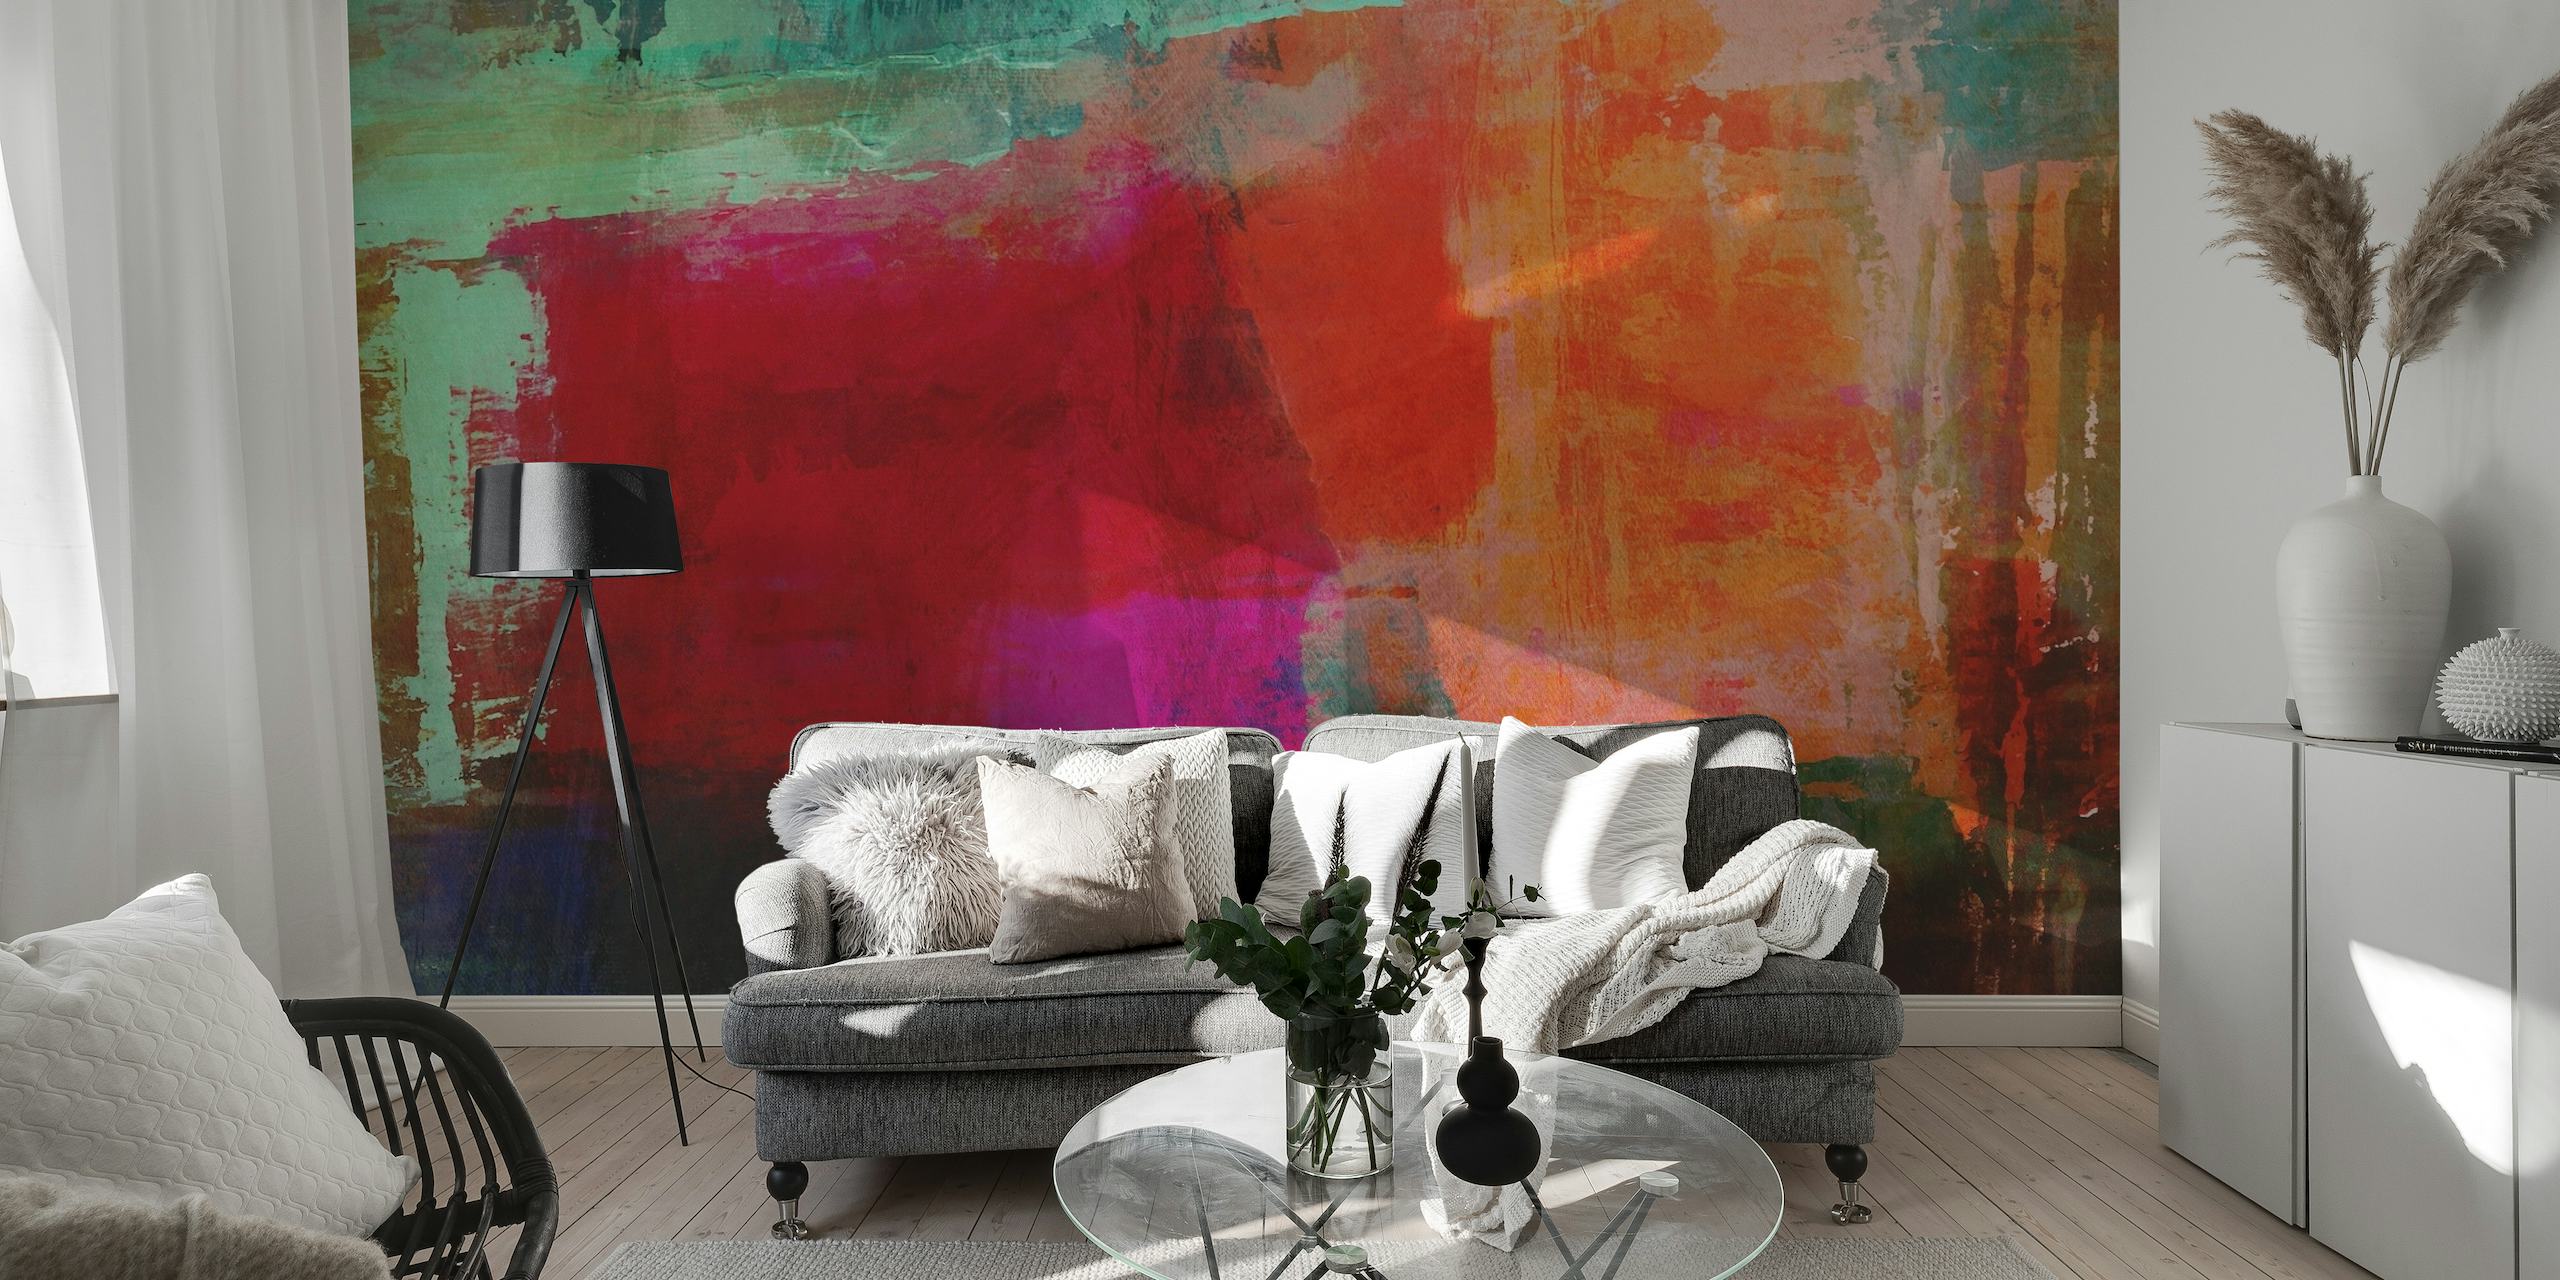 Rustic Geometric 12 abstract wall mural with earthy tones and bold shapes